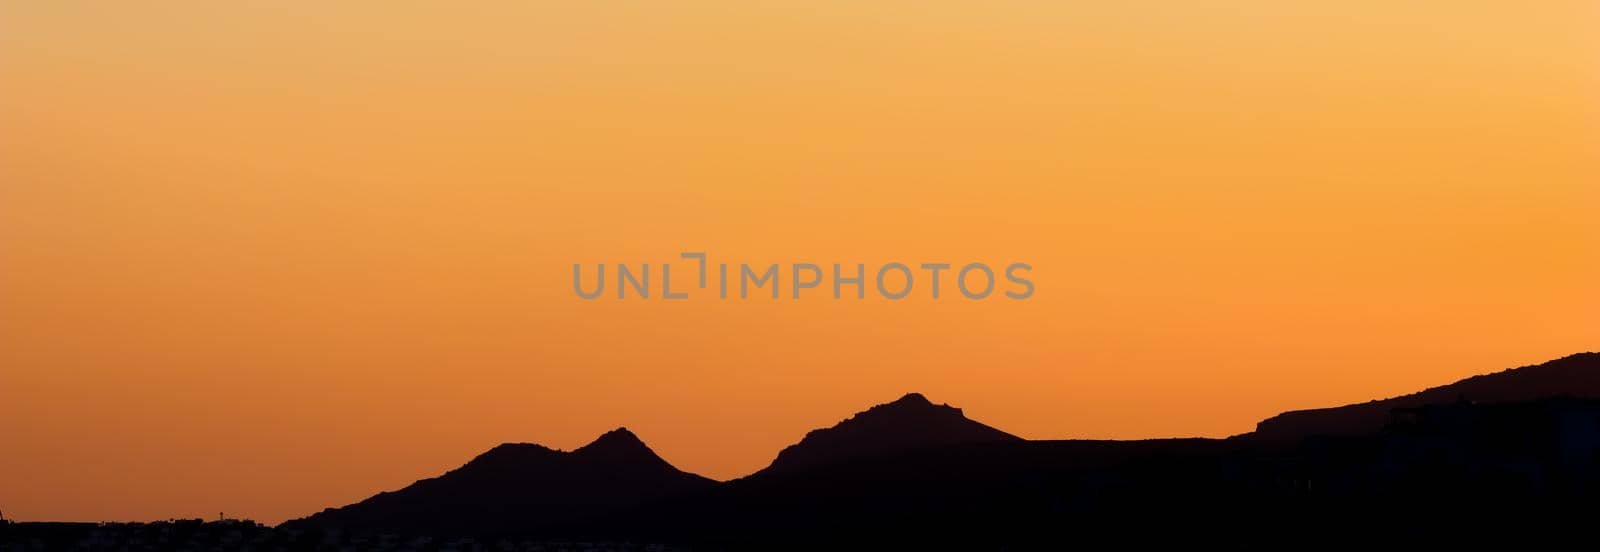 Background from a beautiful colorful sunset with the silhouette of the mountains by Olayola